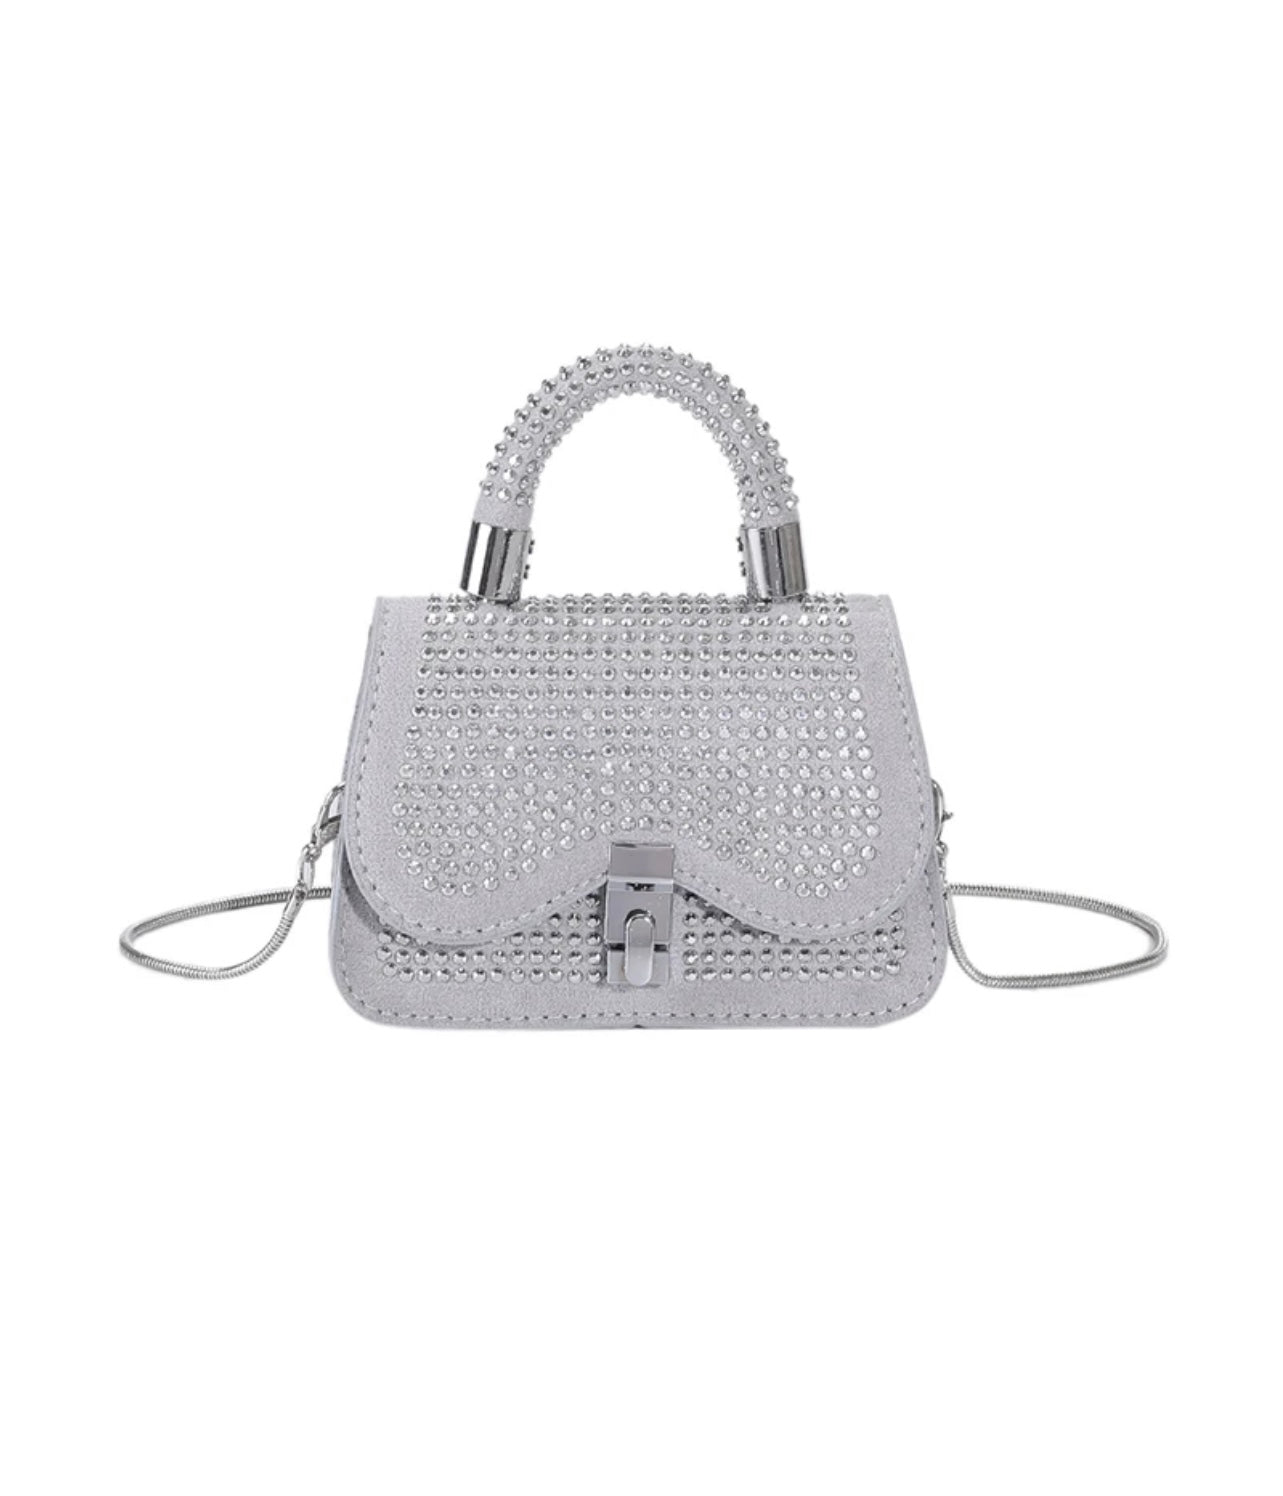 Sequined bag